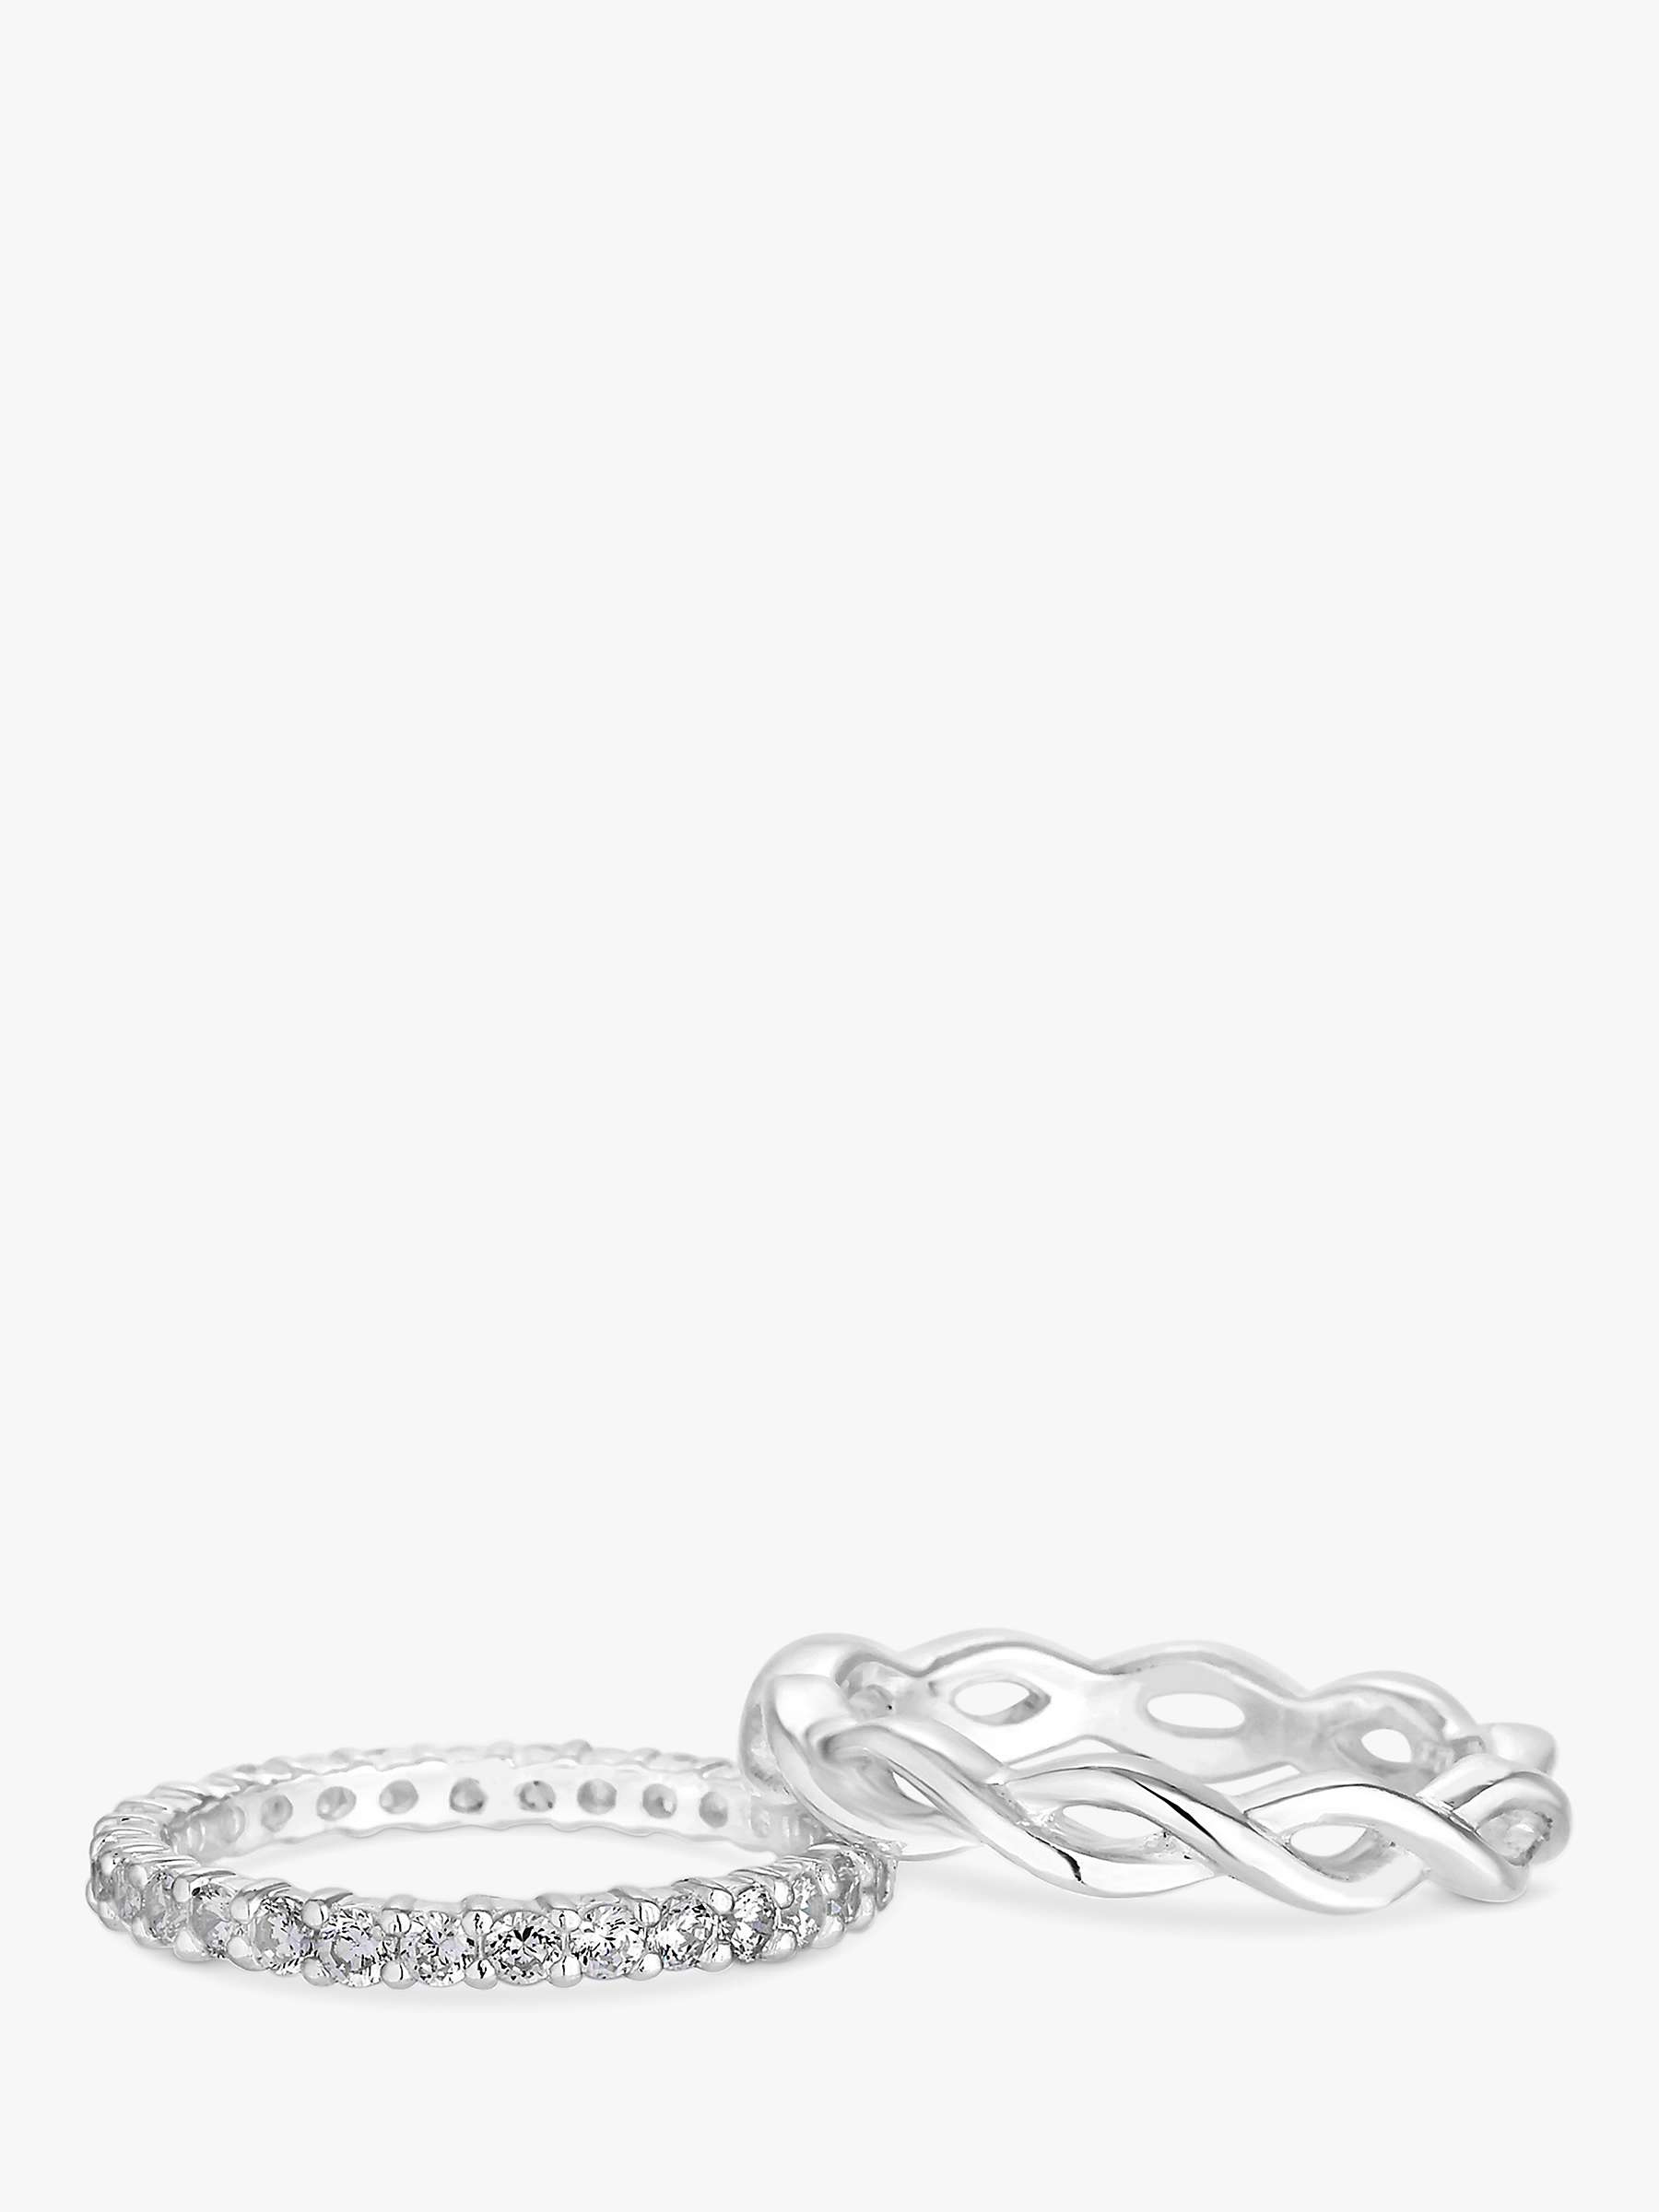 Buy Simply Silver Cubic Zirconia Infinity Ring Set, Pack of 2, Silver Online at johnlewis.com